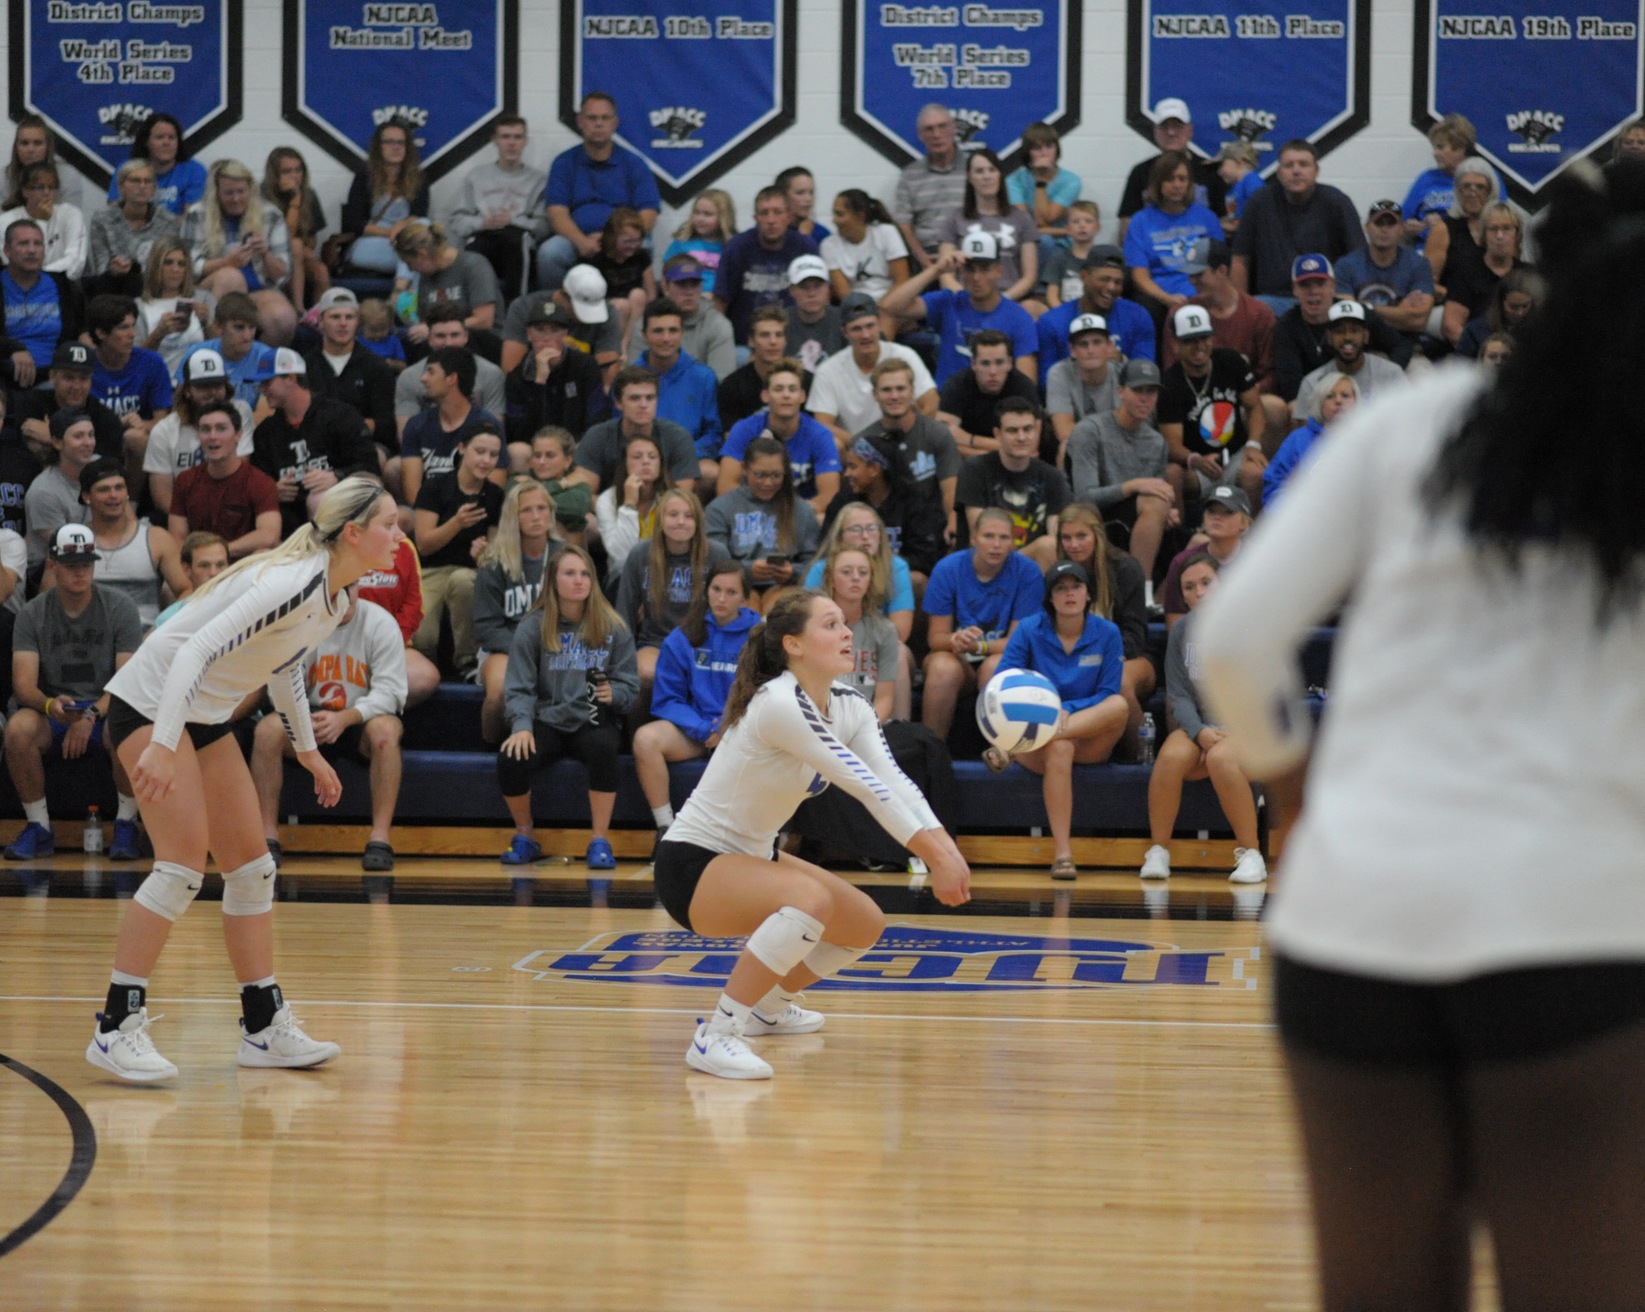 DMACC volleyball team splits four matches in Johnson County Volleyball Challenge